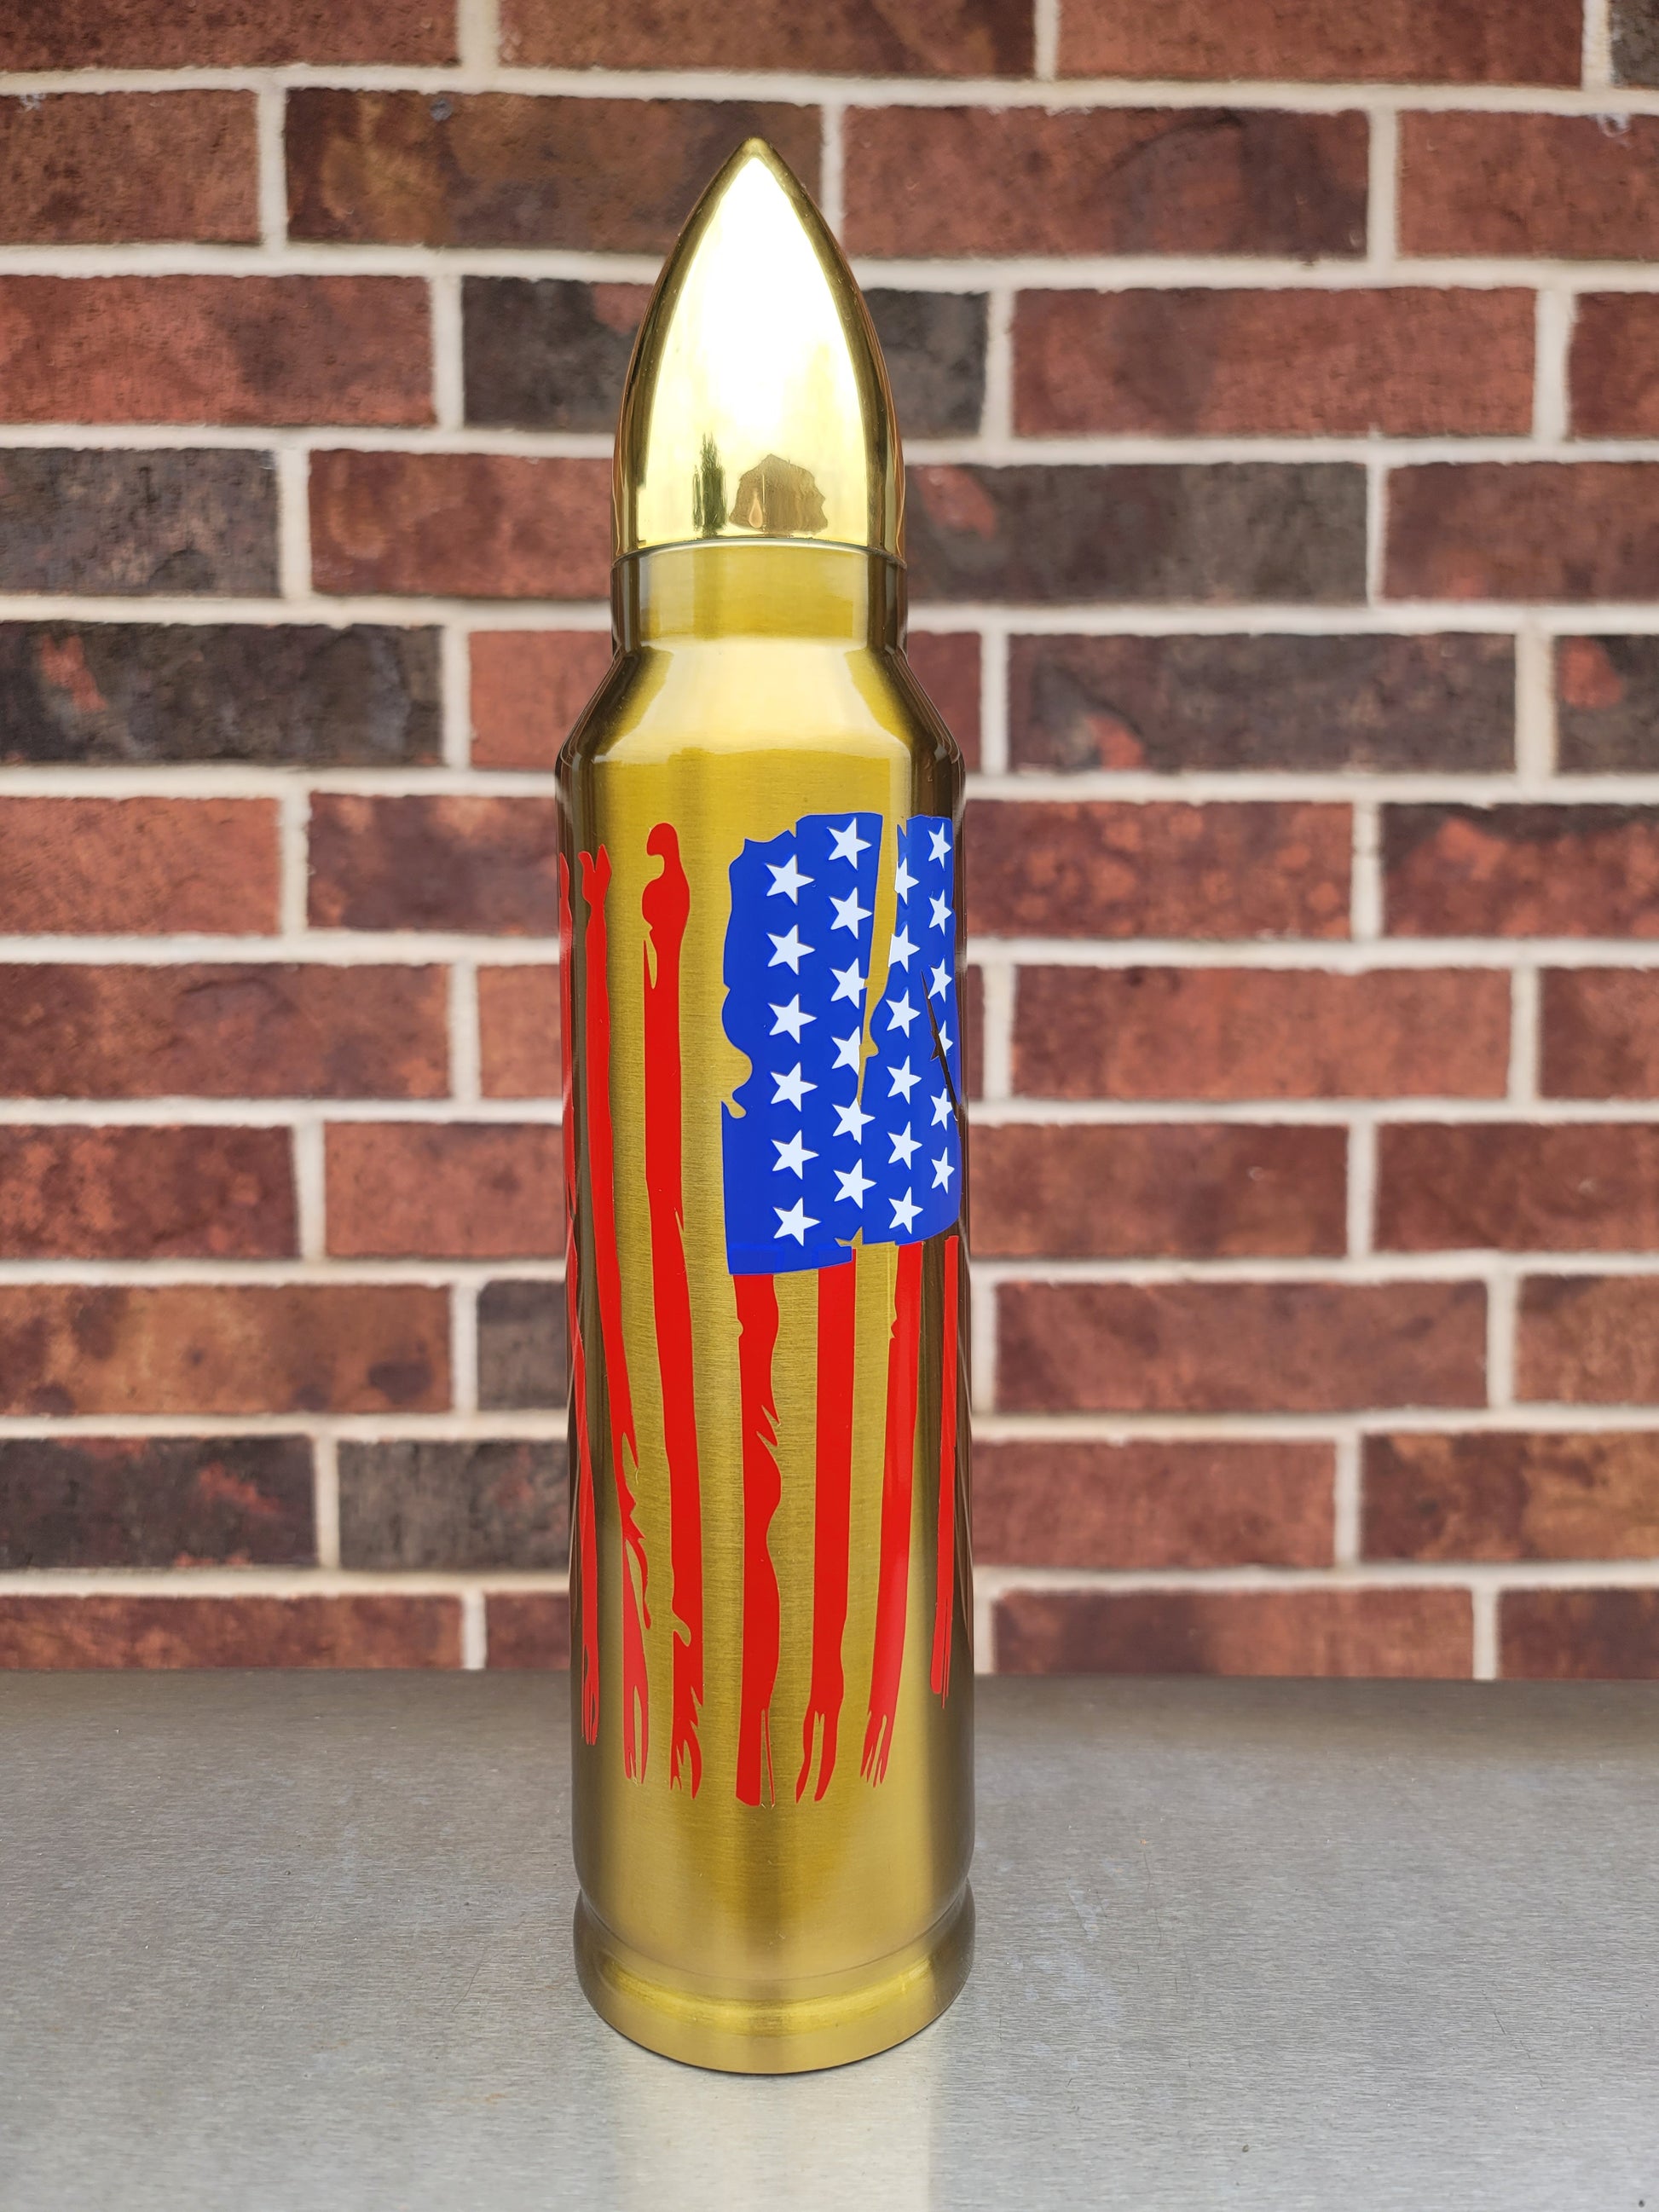 Personalized Bullet Thermos Tumbler, Father's Day Gift, Military